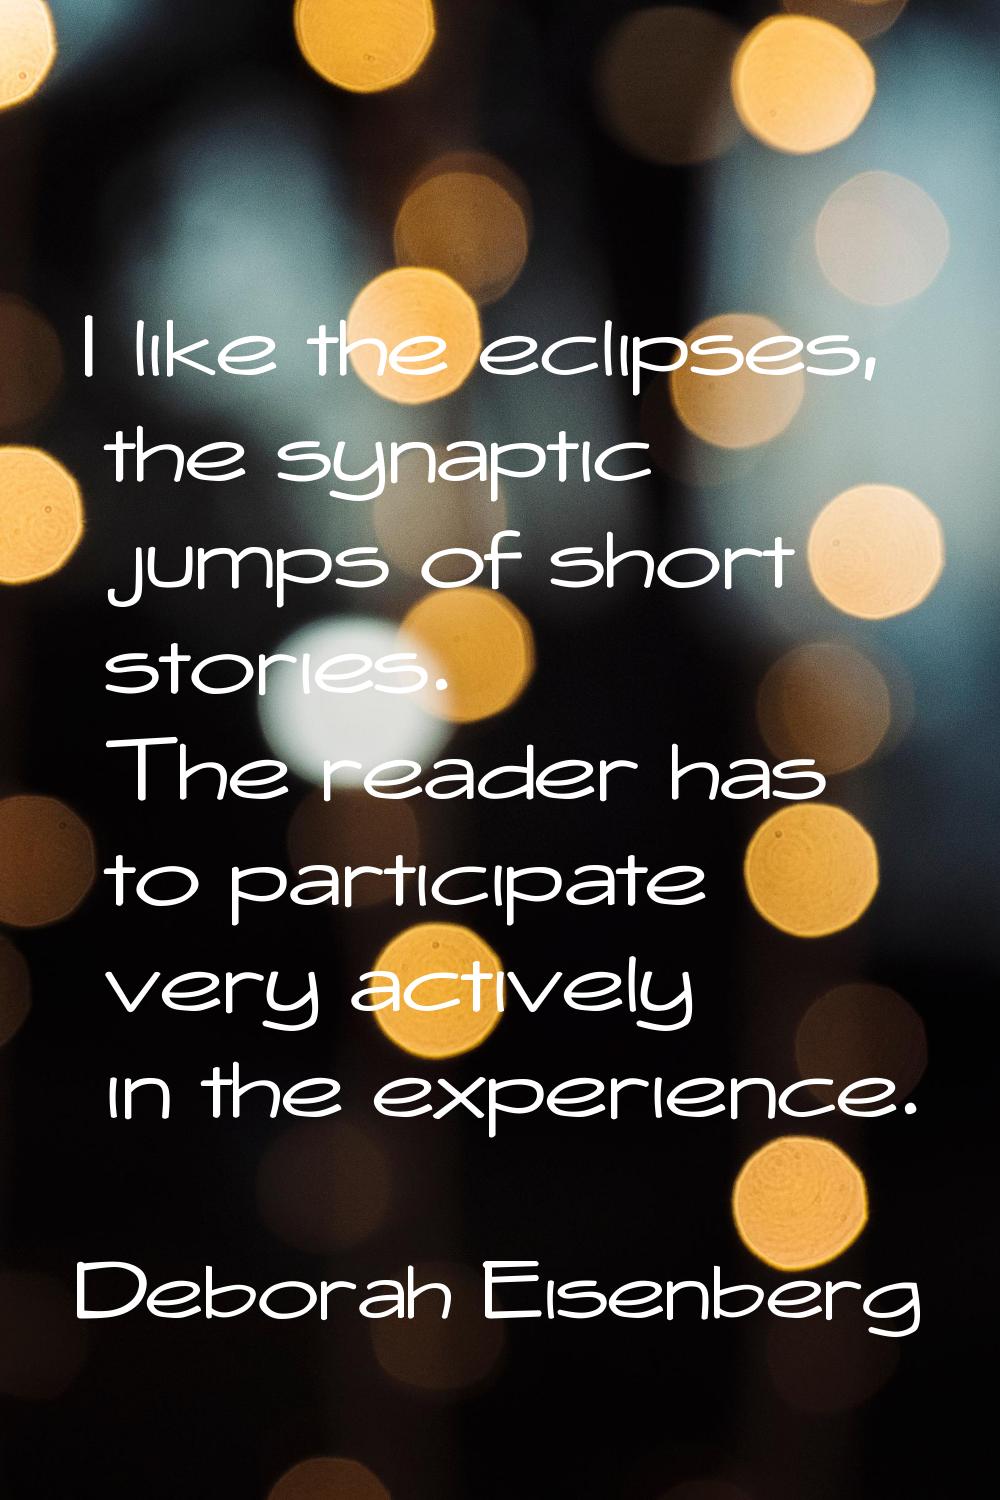 I like the eclipses, the synaptic jumps of short stories. The reader has to participate very active